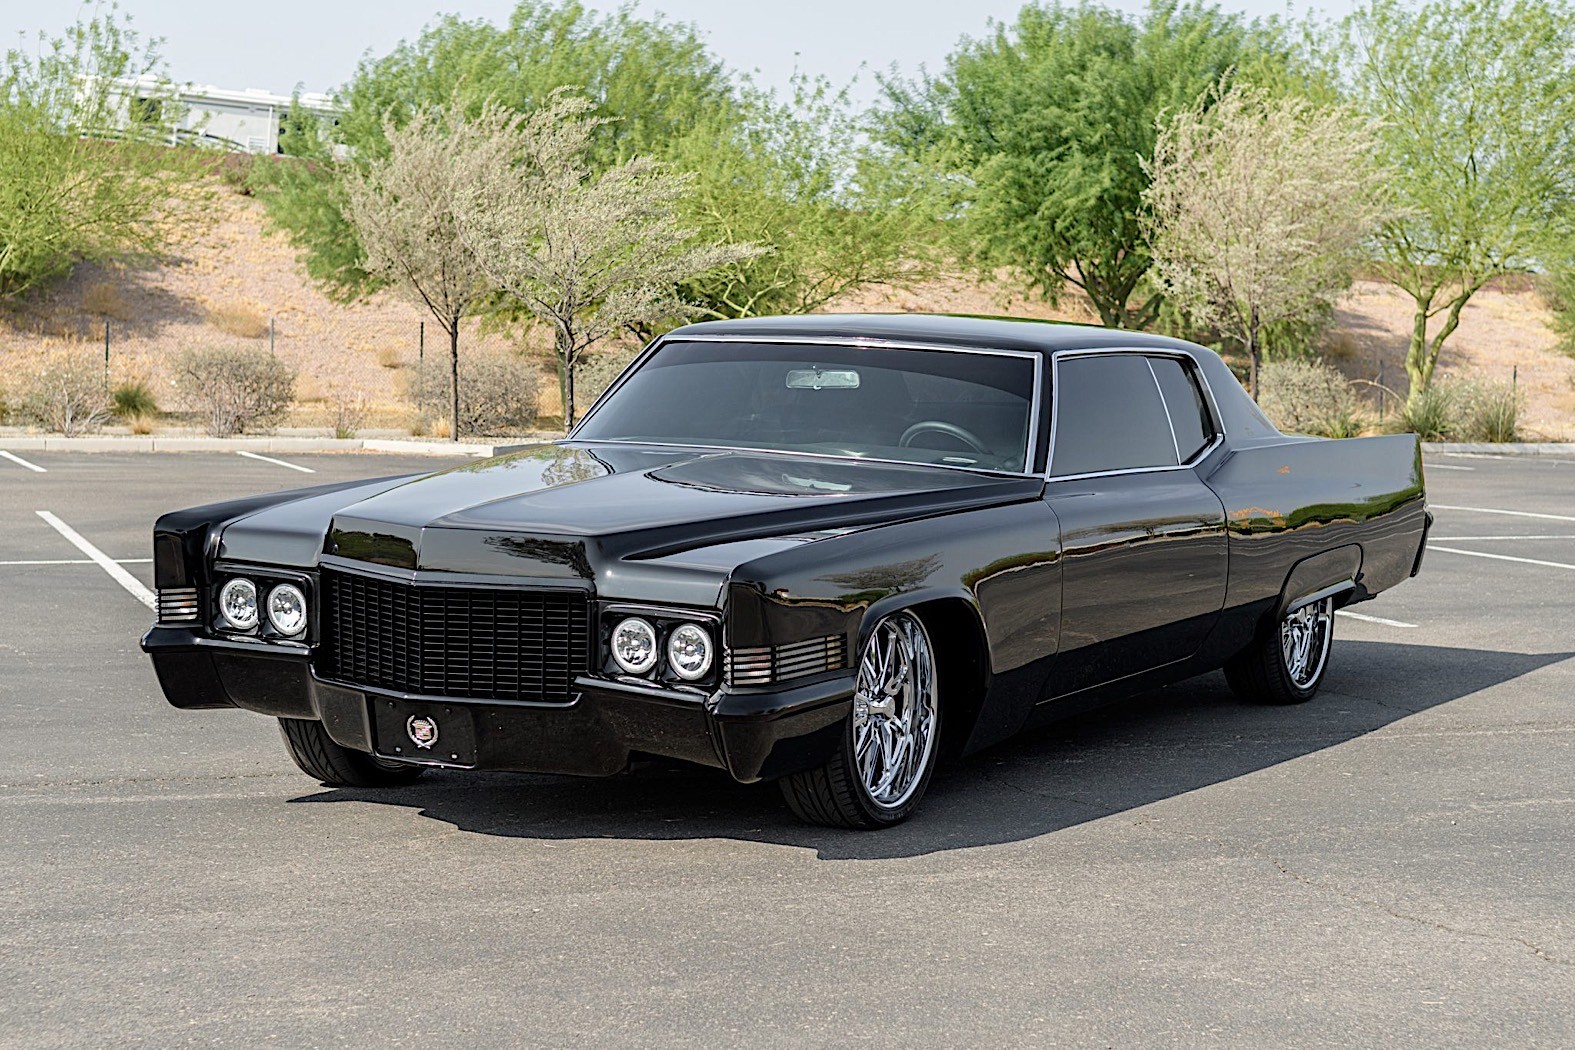 Cadillac Coup De Ville Shaved 1970 Cadillac Coupe DeVille Is the Black Nightmare in the Rearview  Mirror - autoevolution